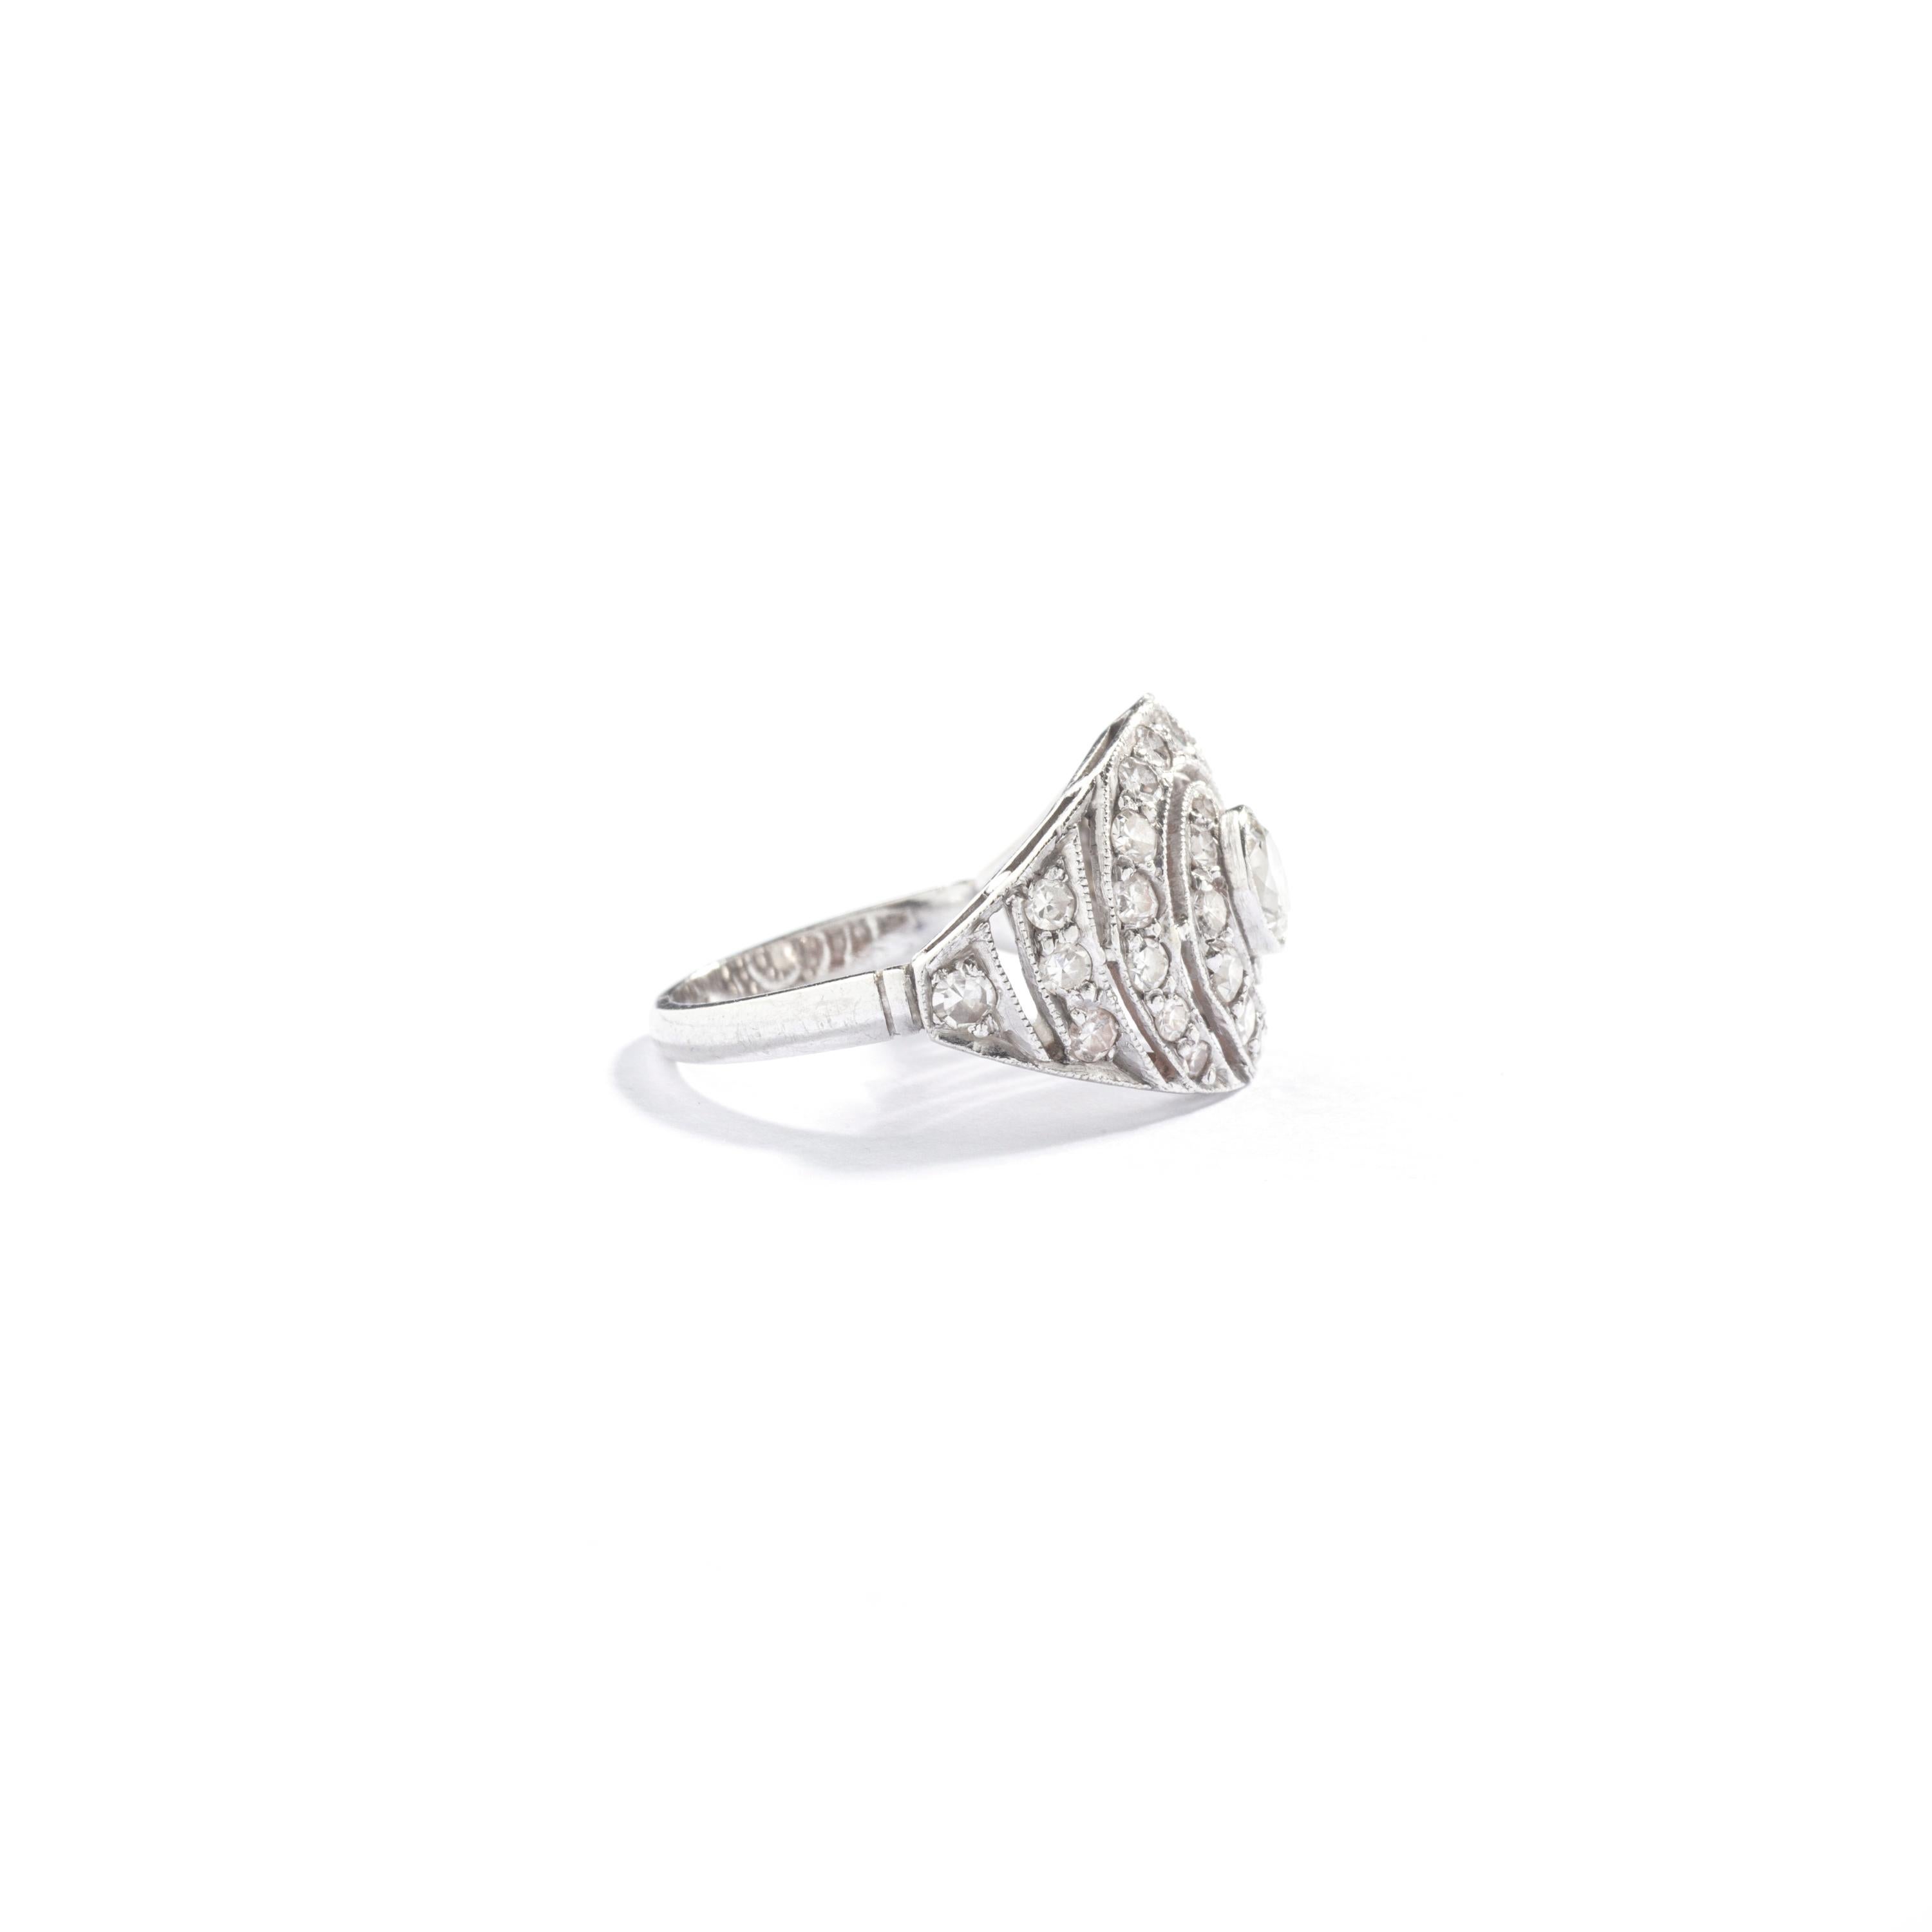 This exquisite art deco engagement ring is the perfect gift for someone seeking a unique and rare piece. Crafted in platinum, the ring features a stunning diamond twisted design that adds a touch of elegance and sophistication.

Dating back to